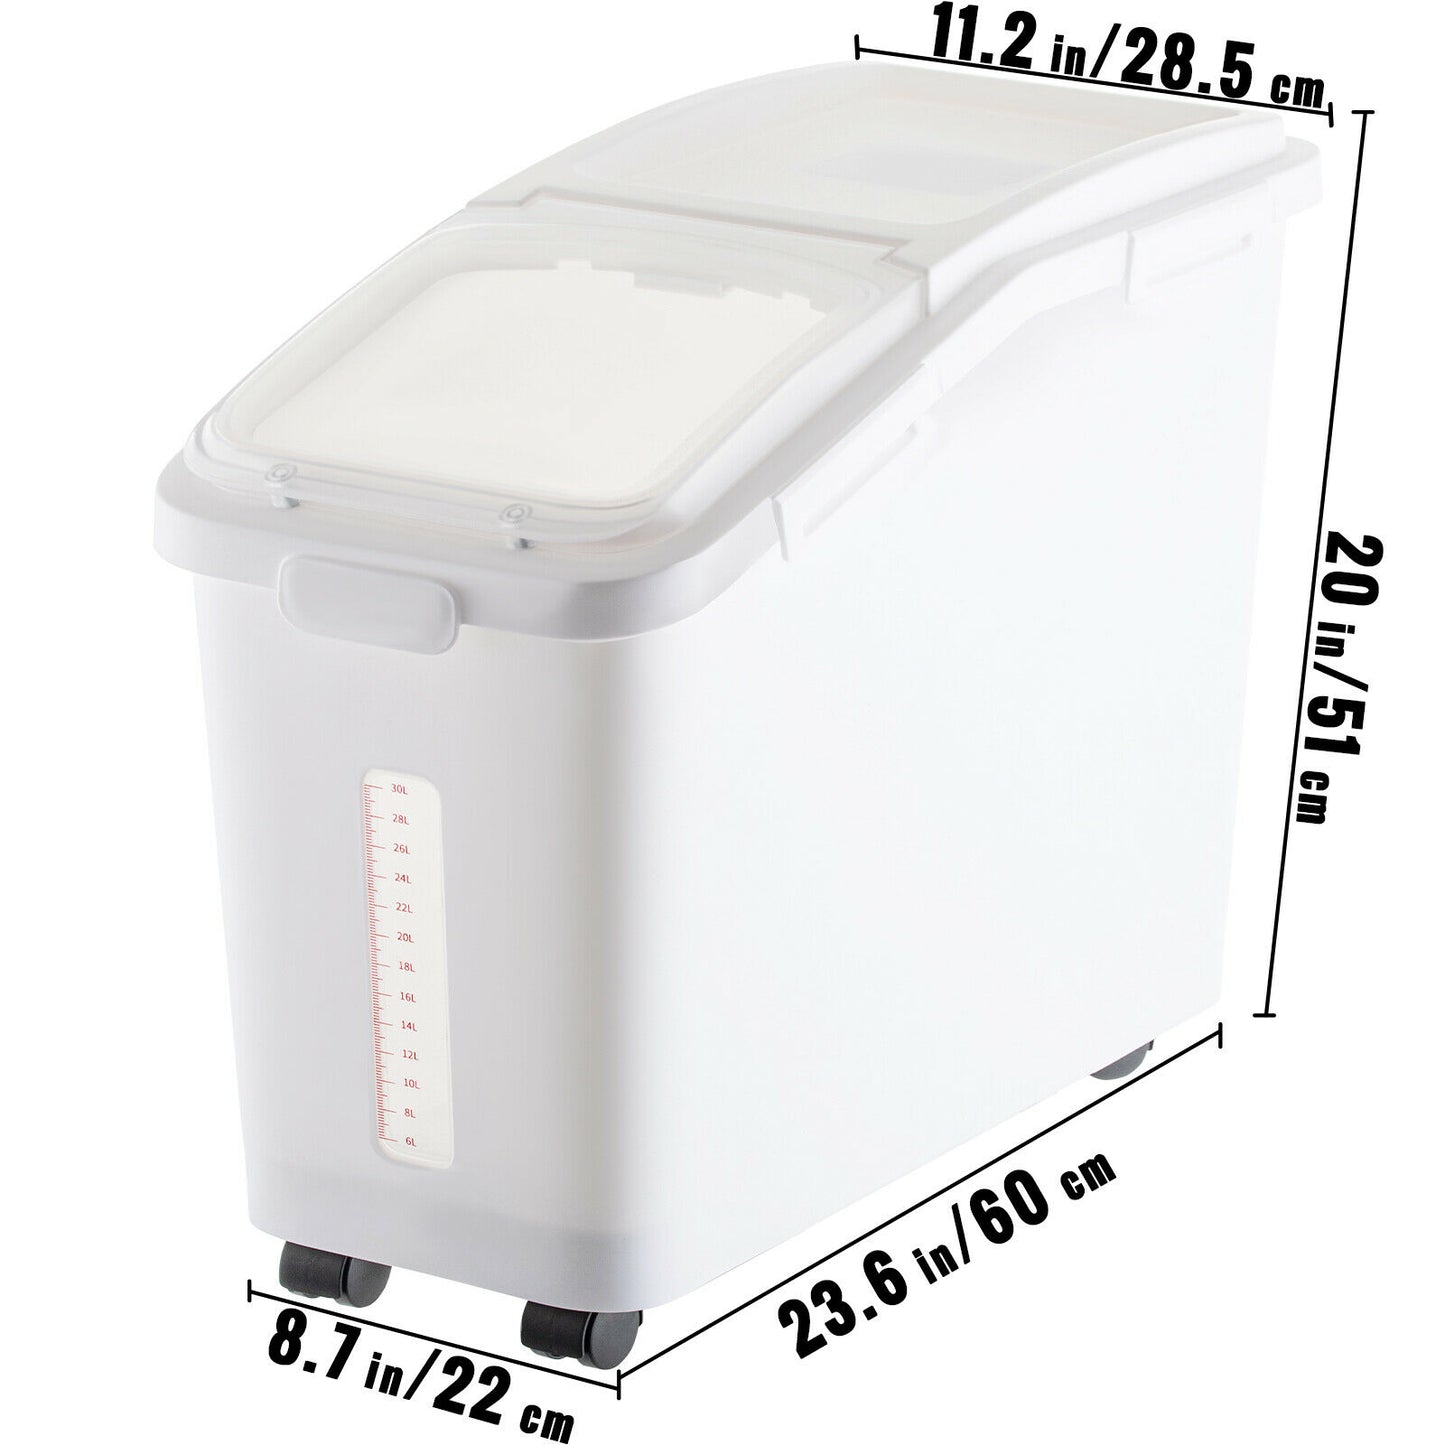 VEVOR Multi-Size Dry Ingredient Storage Bin with Shovel Caster Dustproof Healthy Soybeans Restaurant Kitchen Commercial Home Use - youronestopstore23